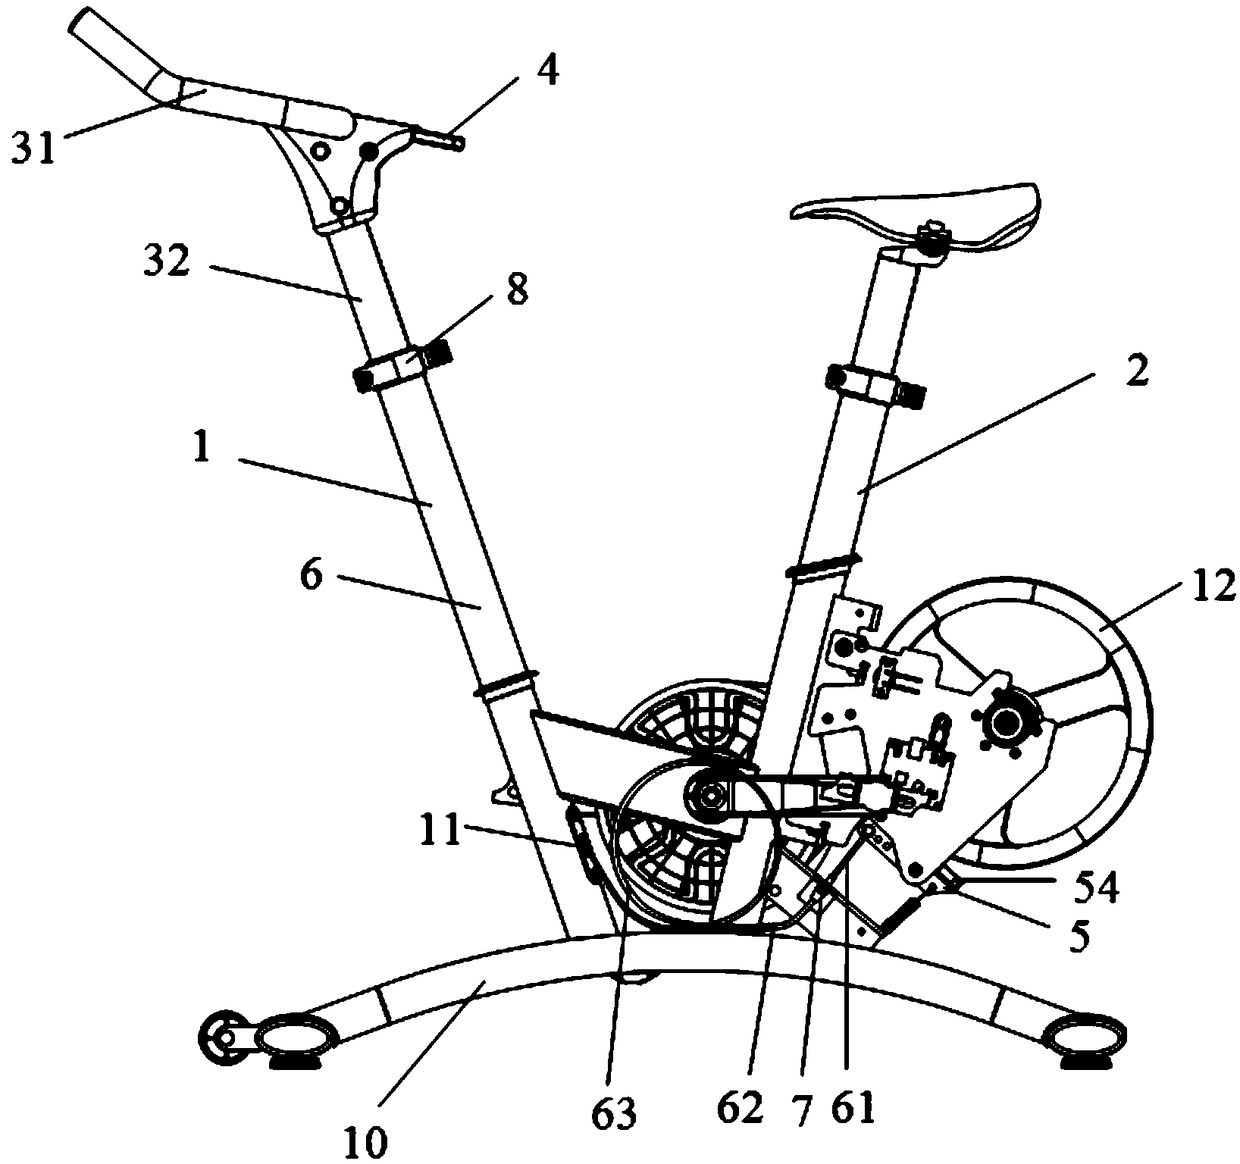 A brake device for an exercise bicycle